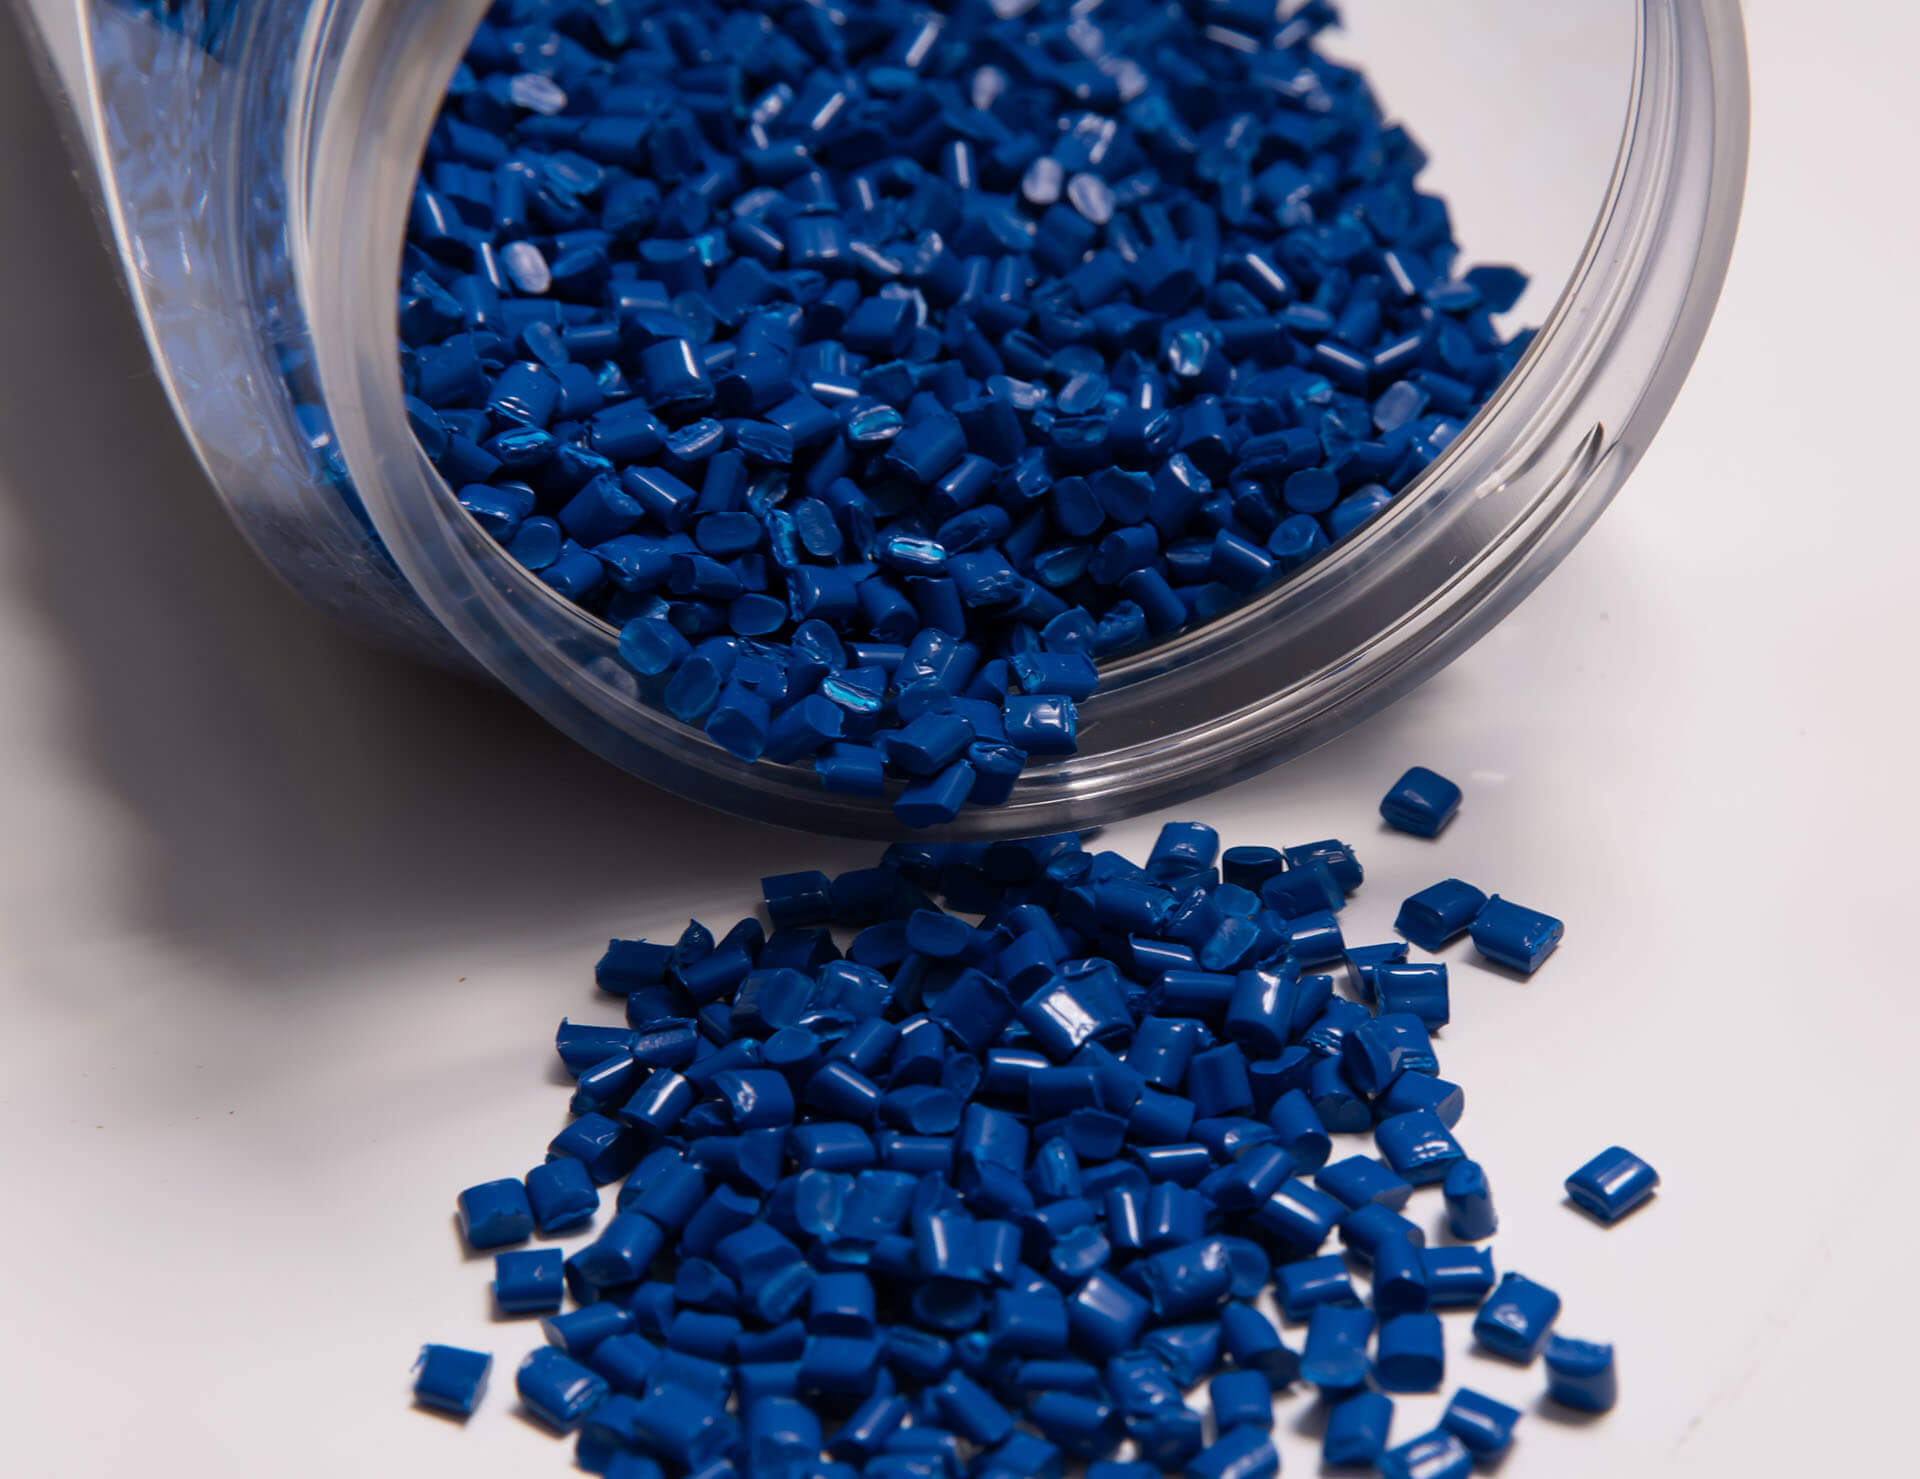 pile of injection molding resin pellets that is blue